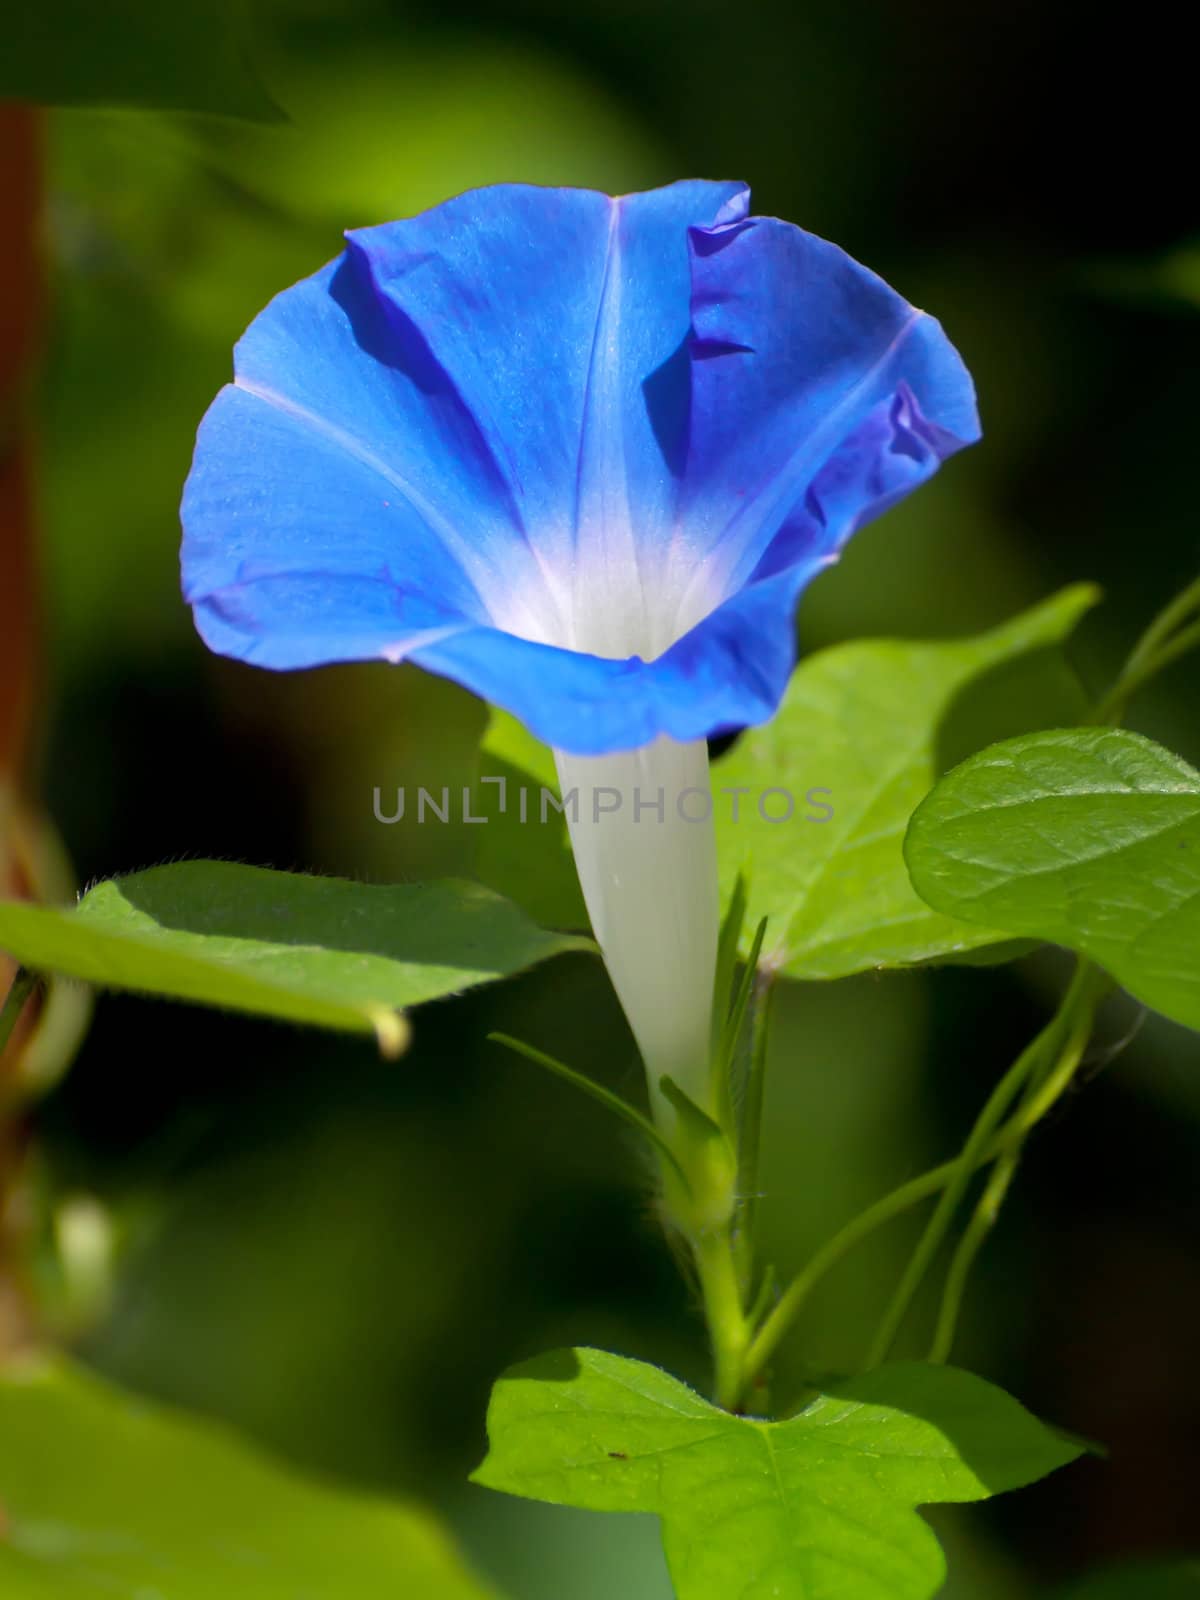 Beautiful blue flower of Morning glory(Ipomoea sp. Family Convolvulaceae)